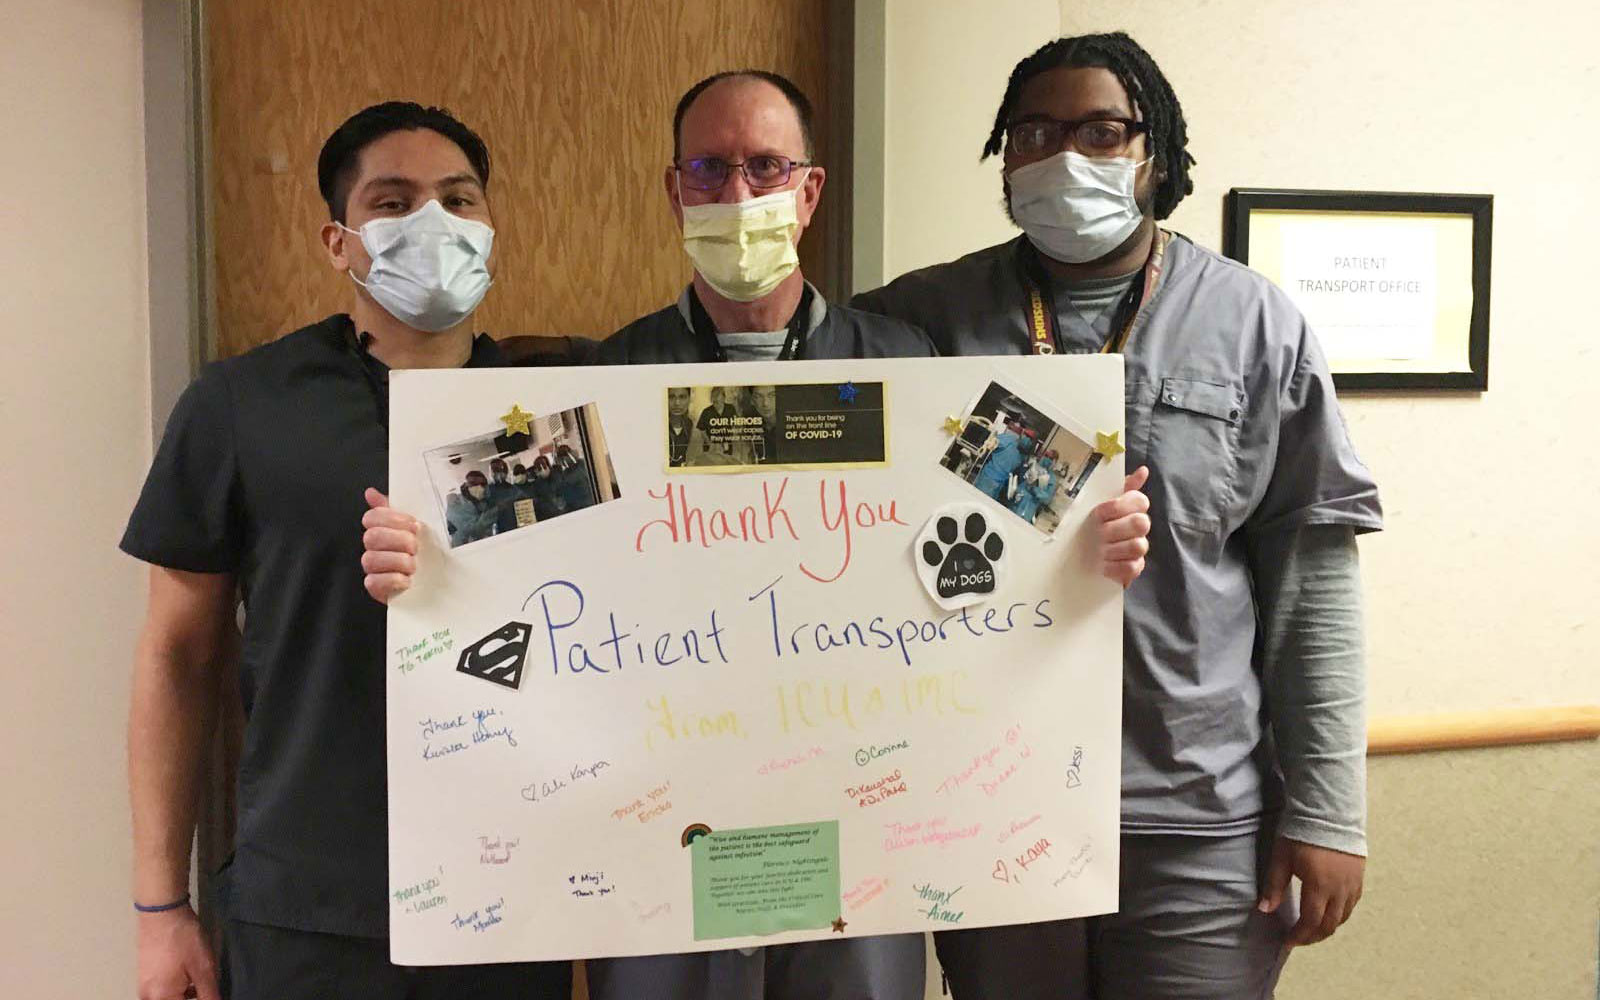 patient transporters holding sign with gratitude messages